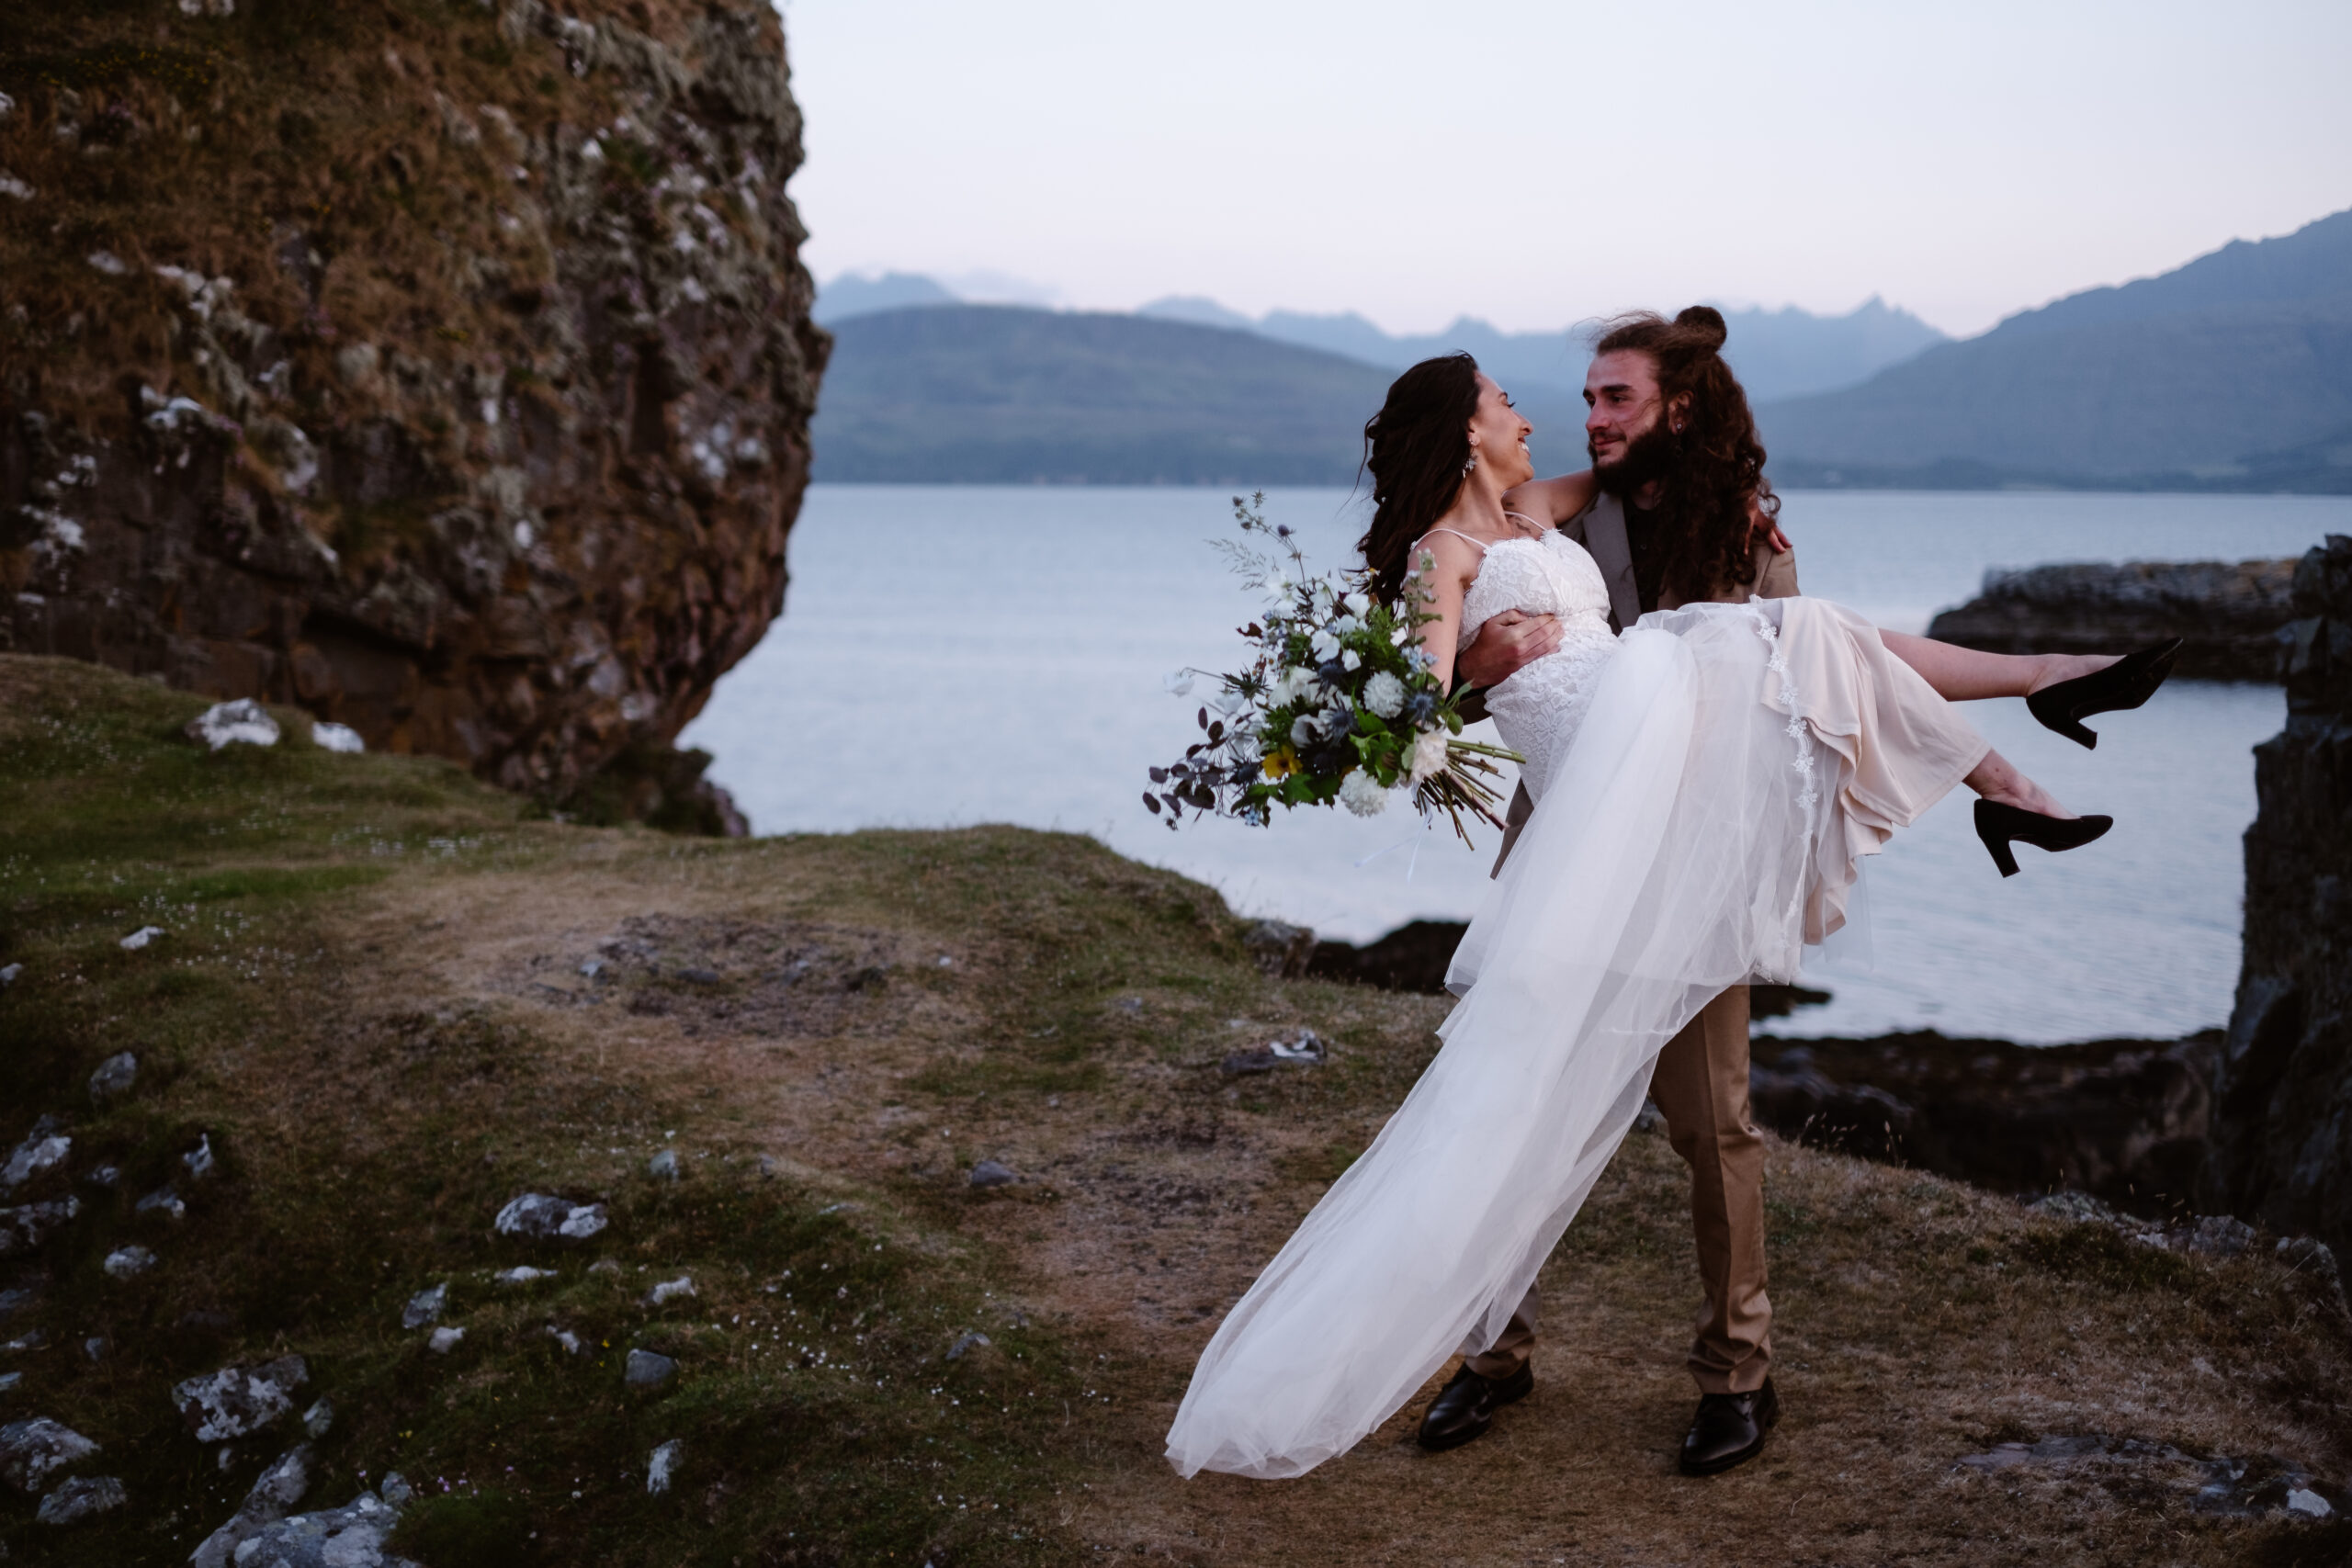 A Whimsical Guide to Tying the Knot on Scotland’s Isle of Skye